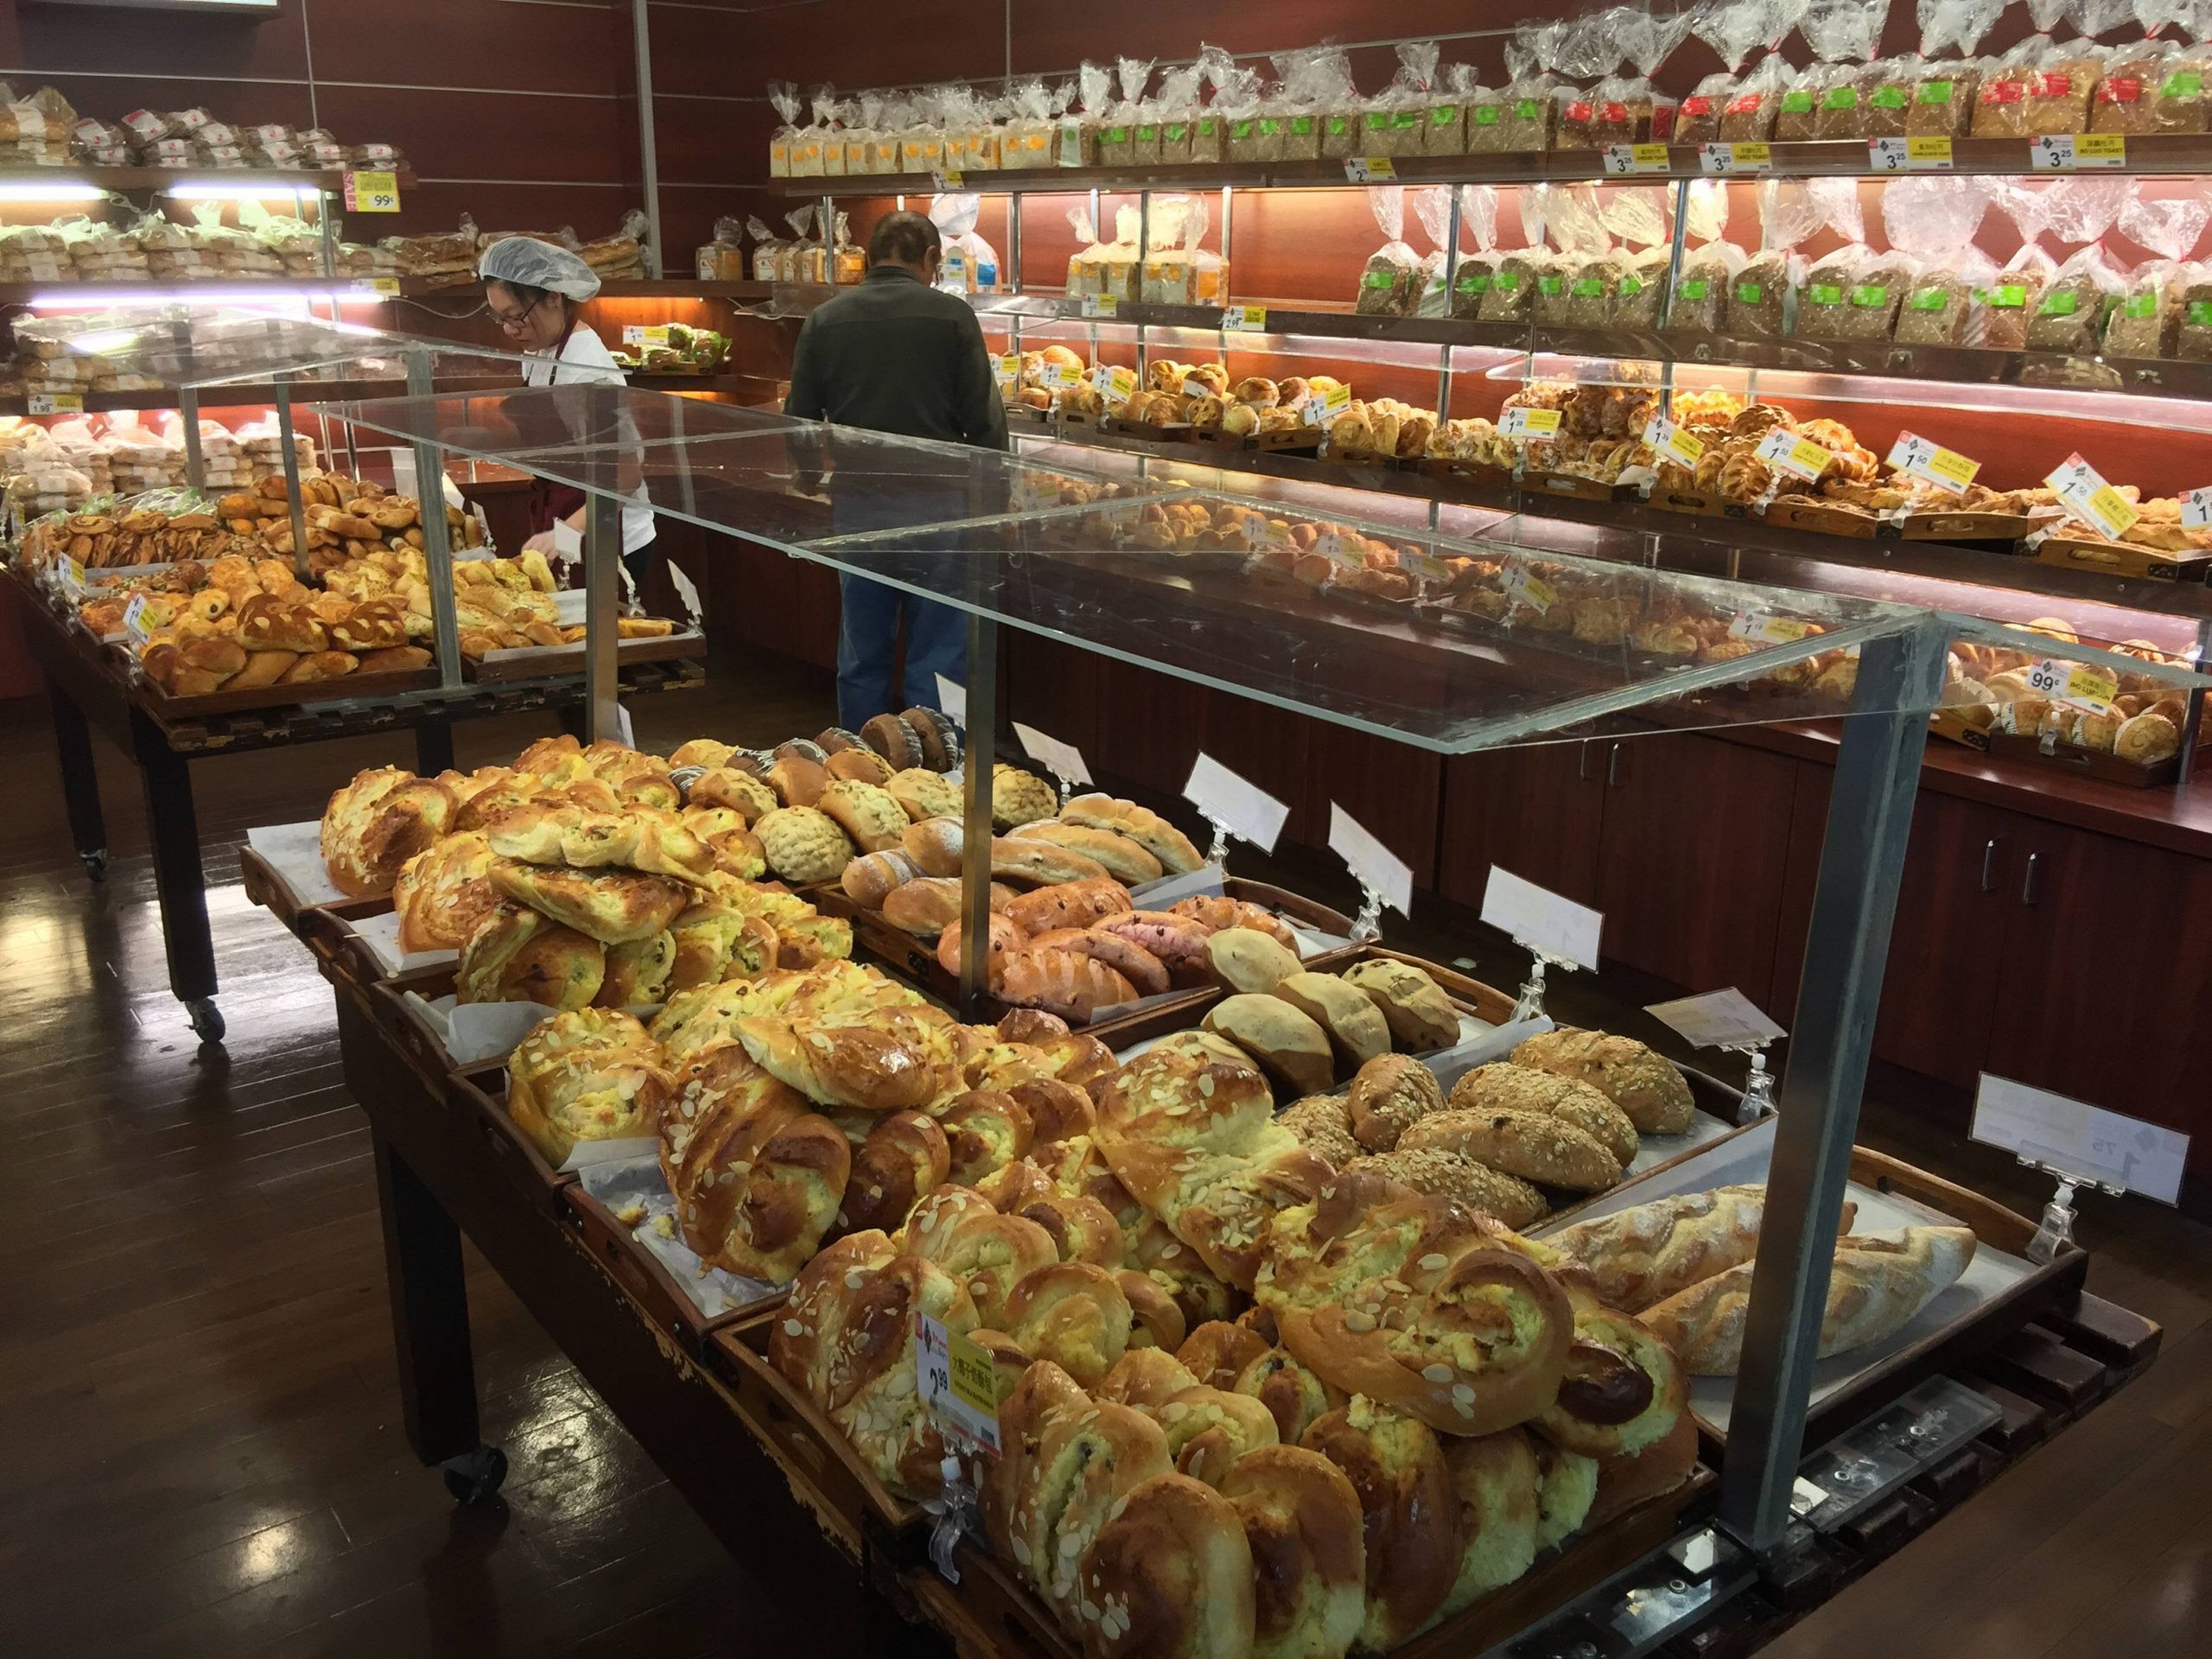 99 Ranch has the best grocery store bakery : houston